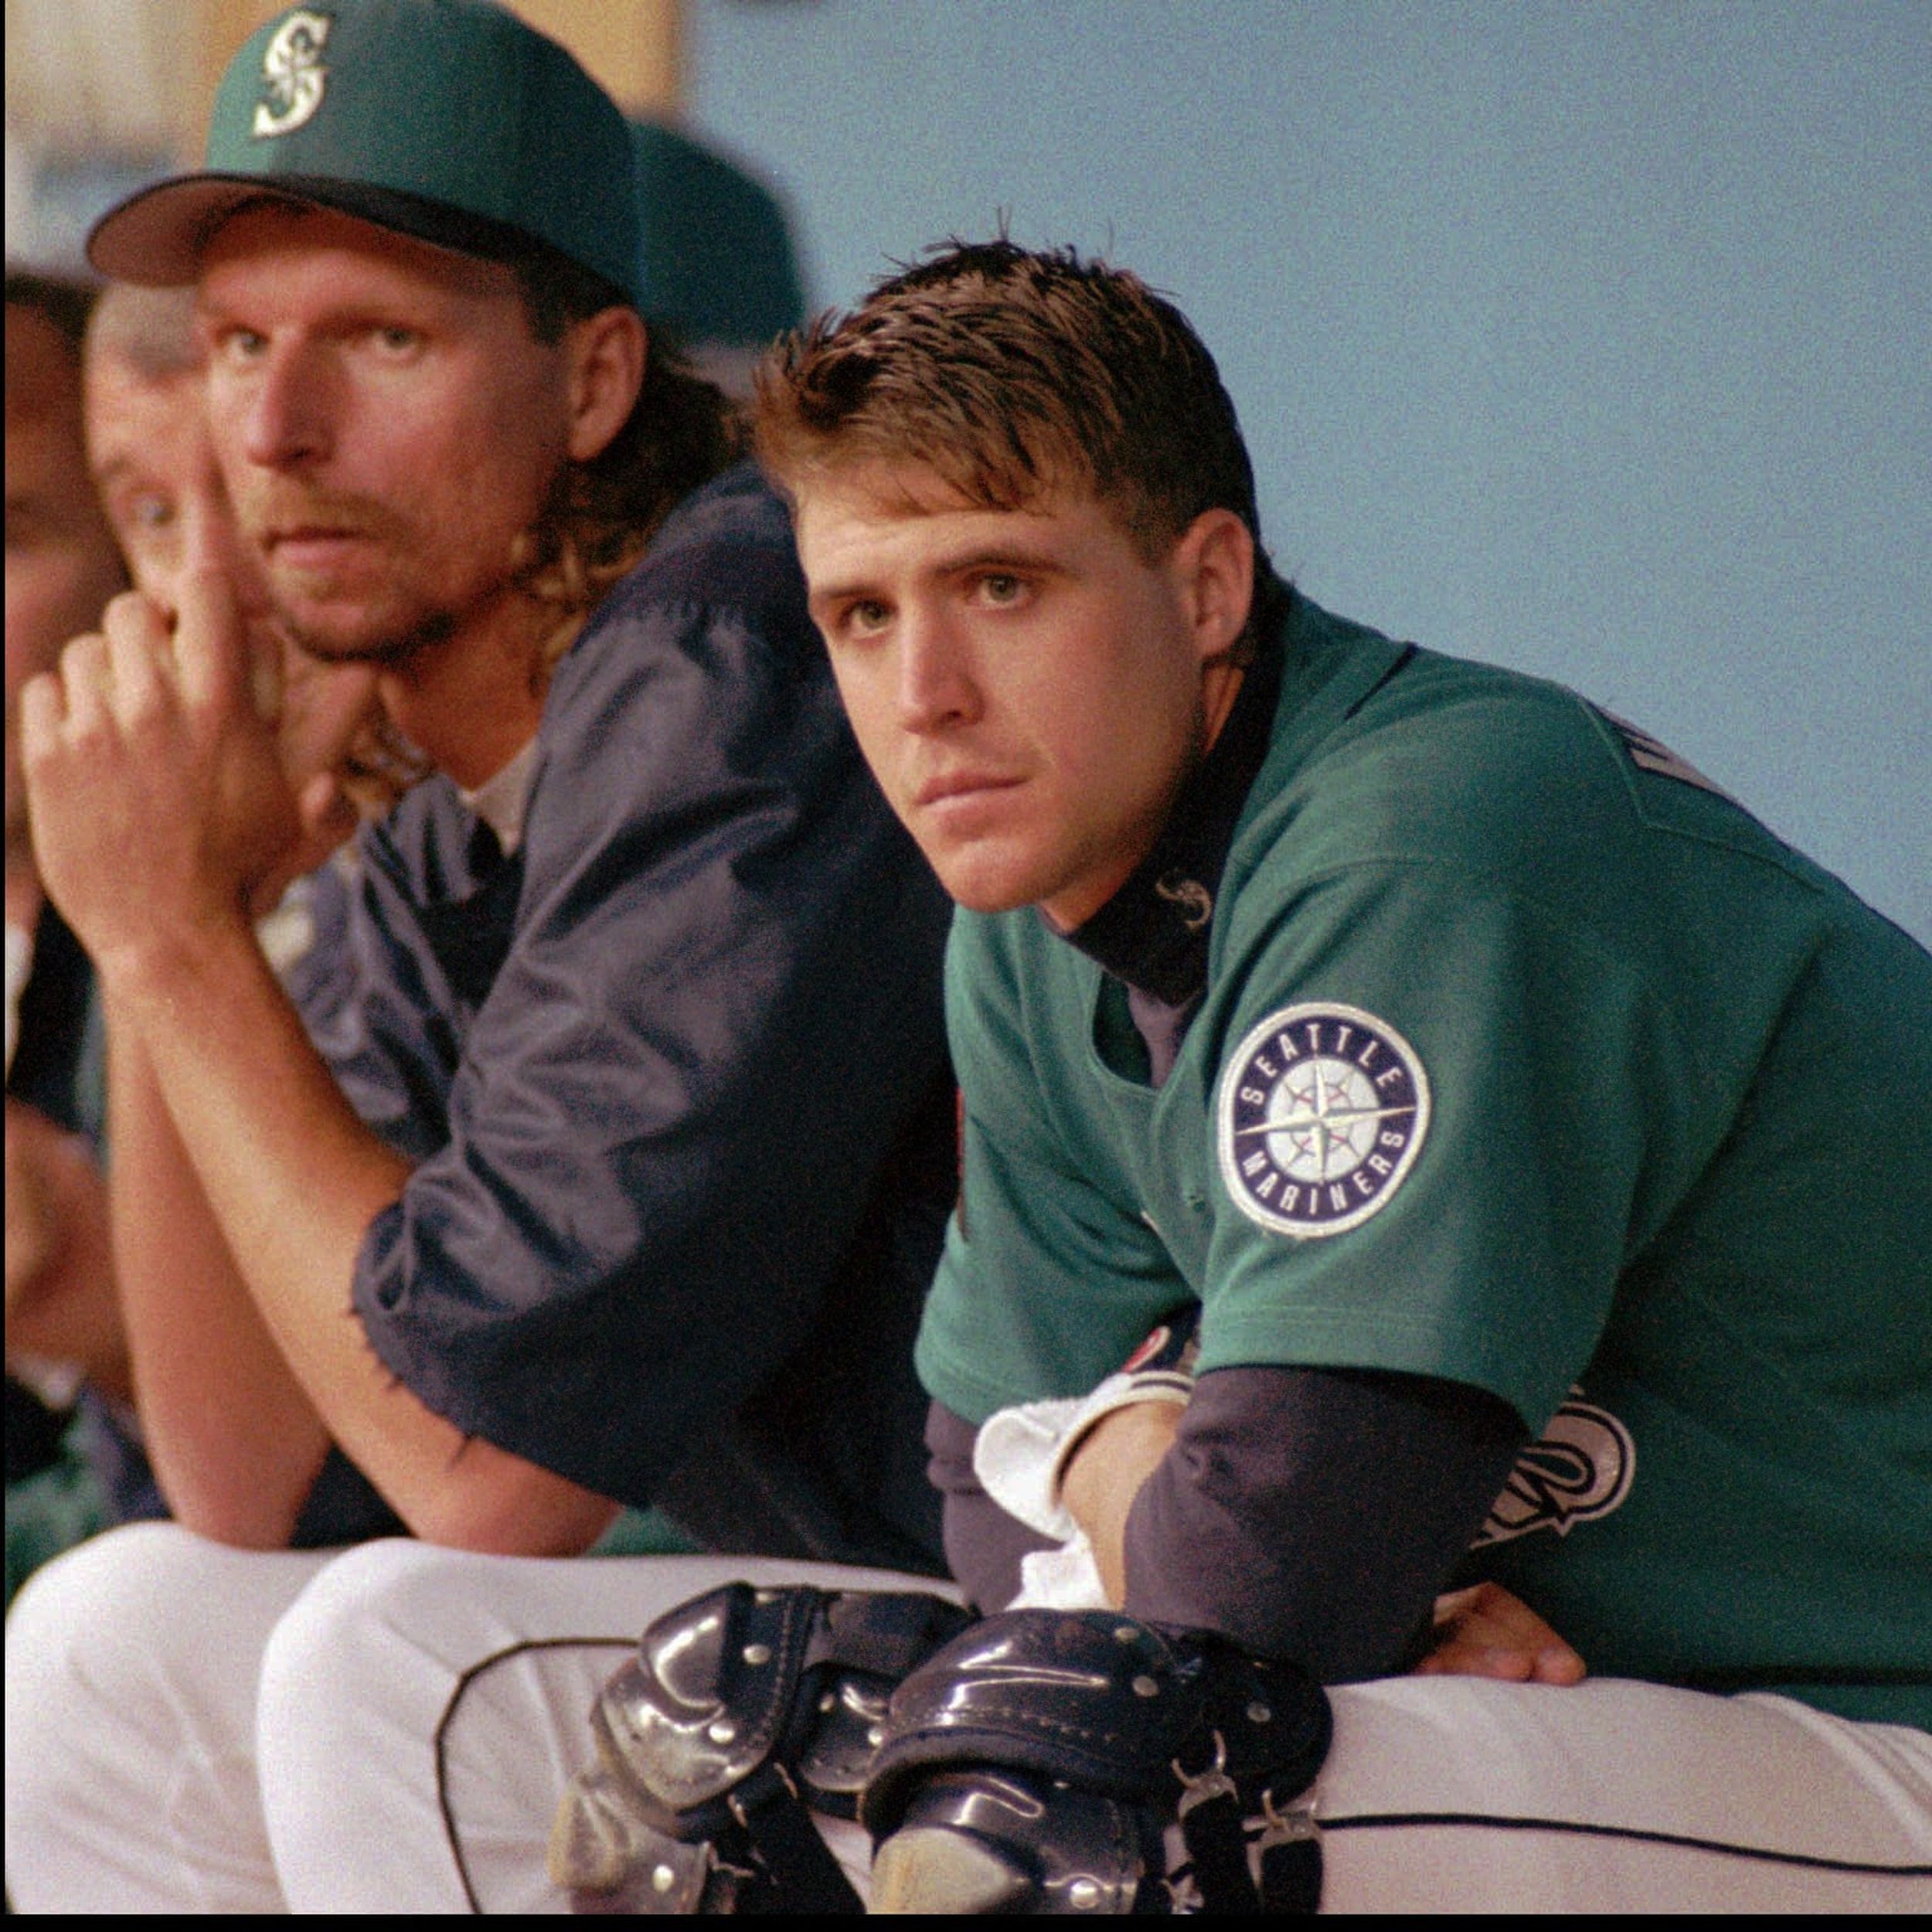 Johnson, Wilson going into M's Hall of Fame together